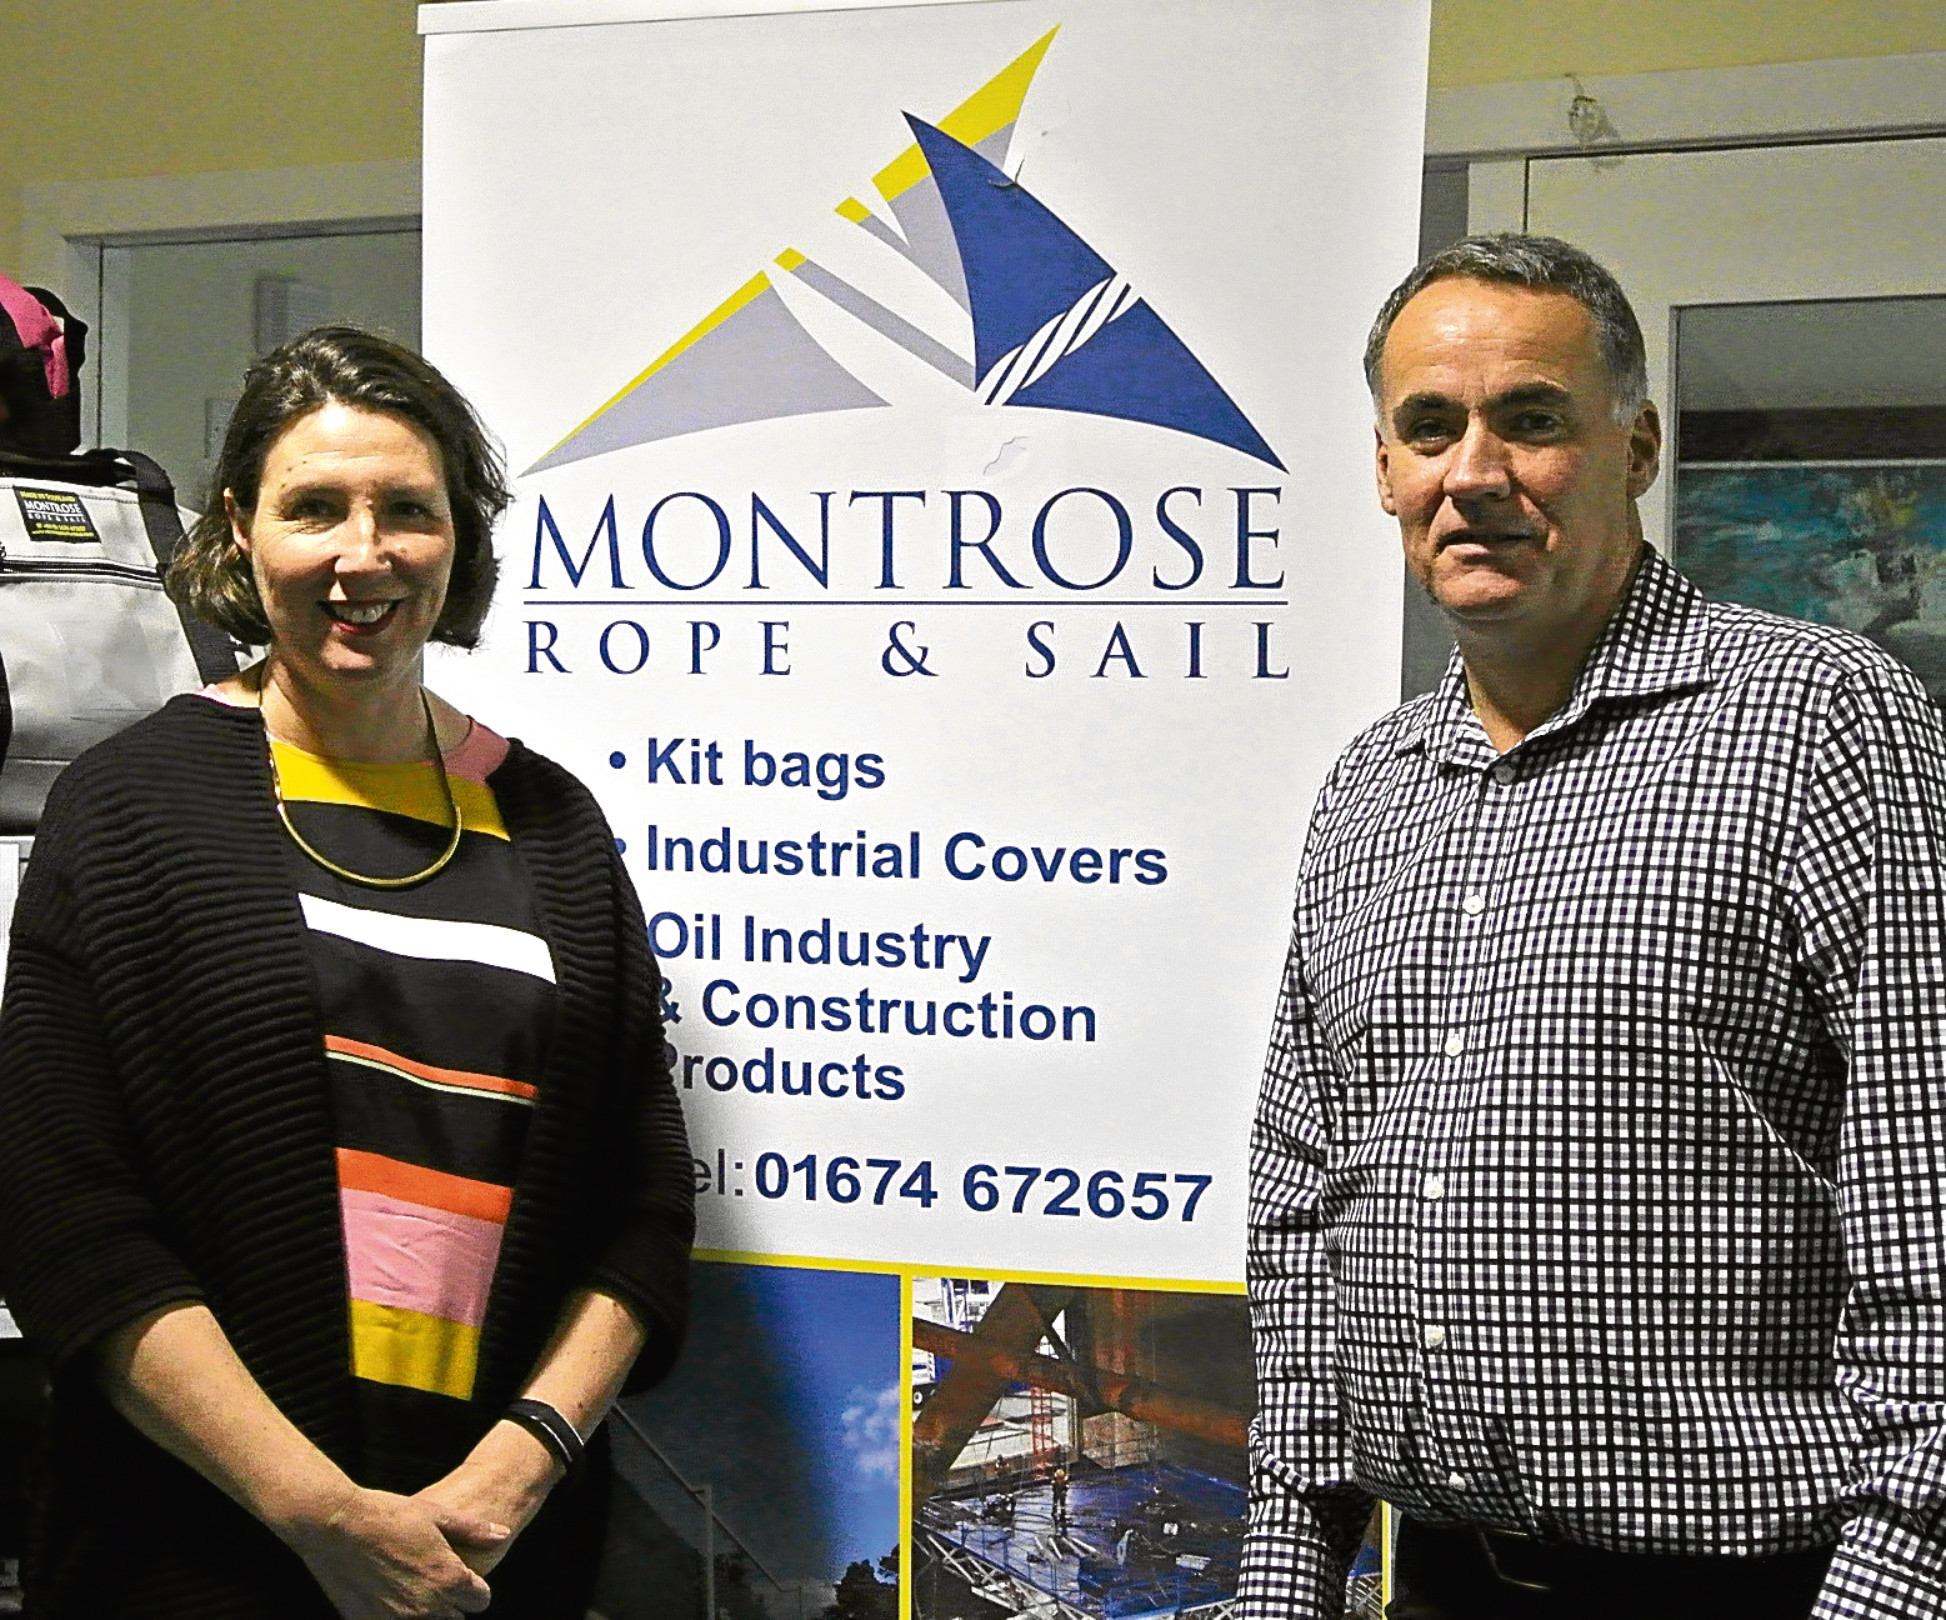 Josie Steed from Robert Gordon Universitys Greys School of Art with Neil Paton, MD of Montrose Rope & Sail.